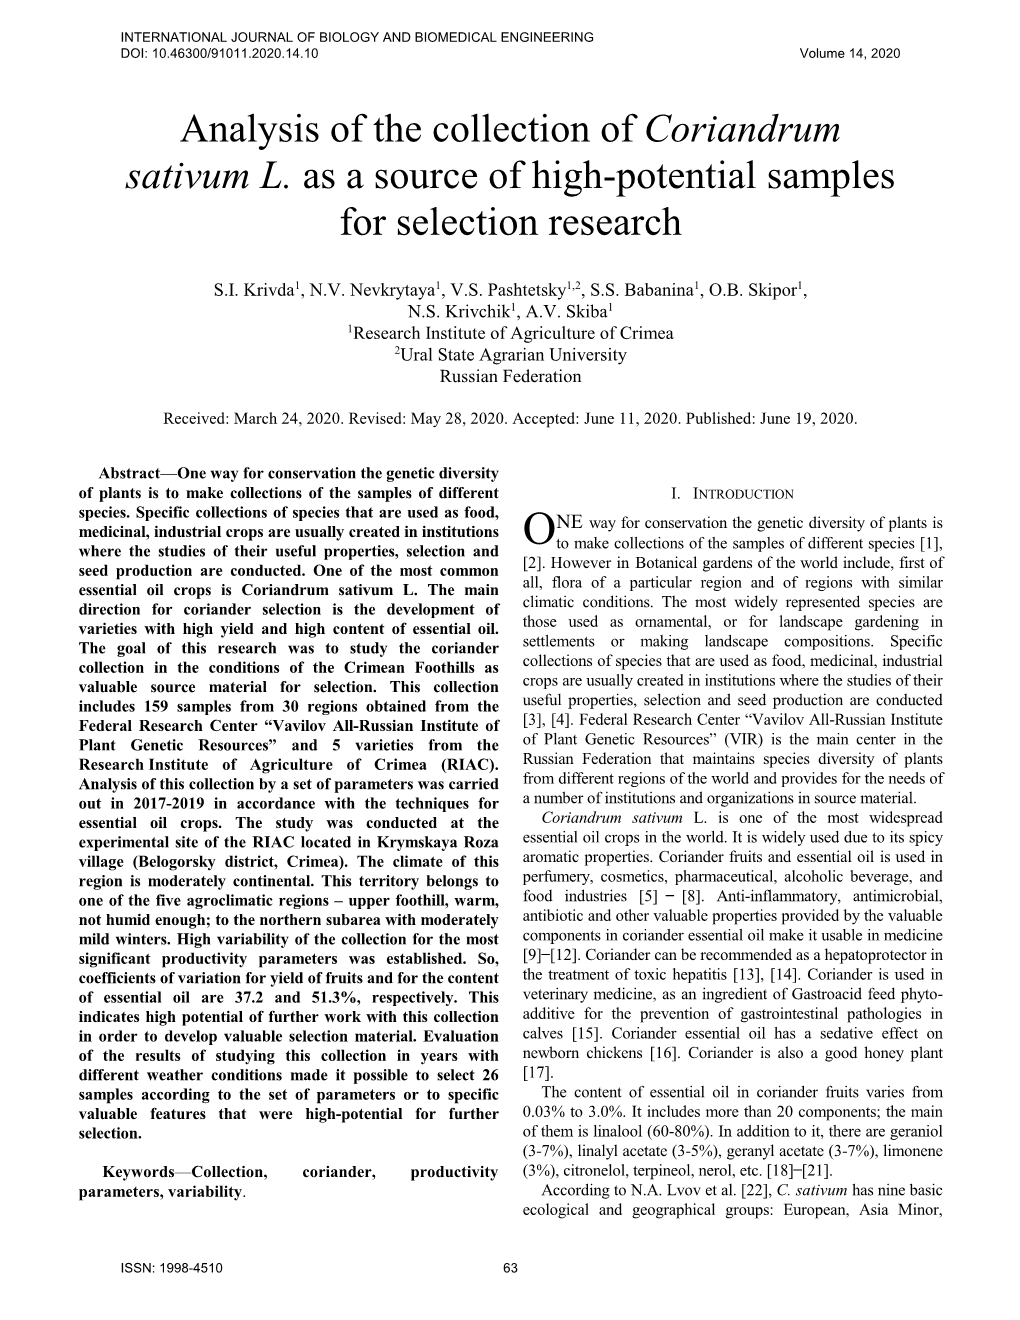 Analysis of the Collection of Coriandrum Sativum L. As a Source of High-Potential Samples for Selection Research